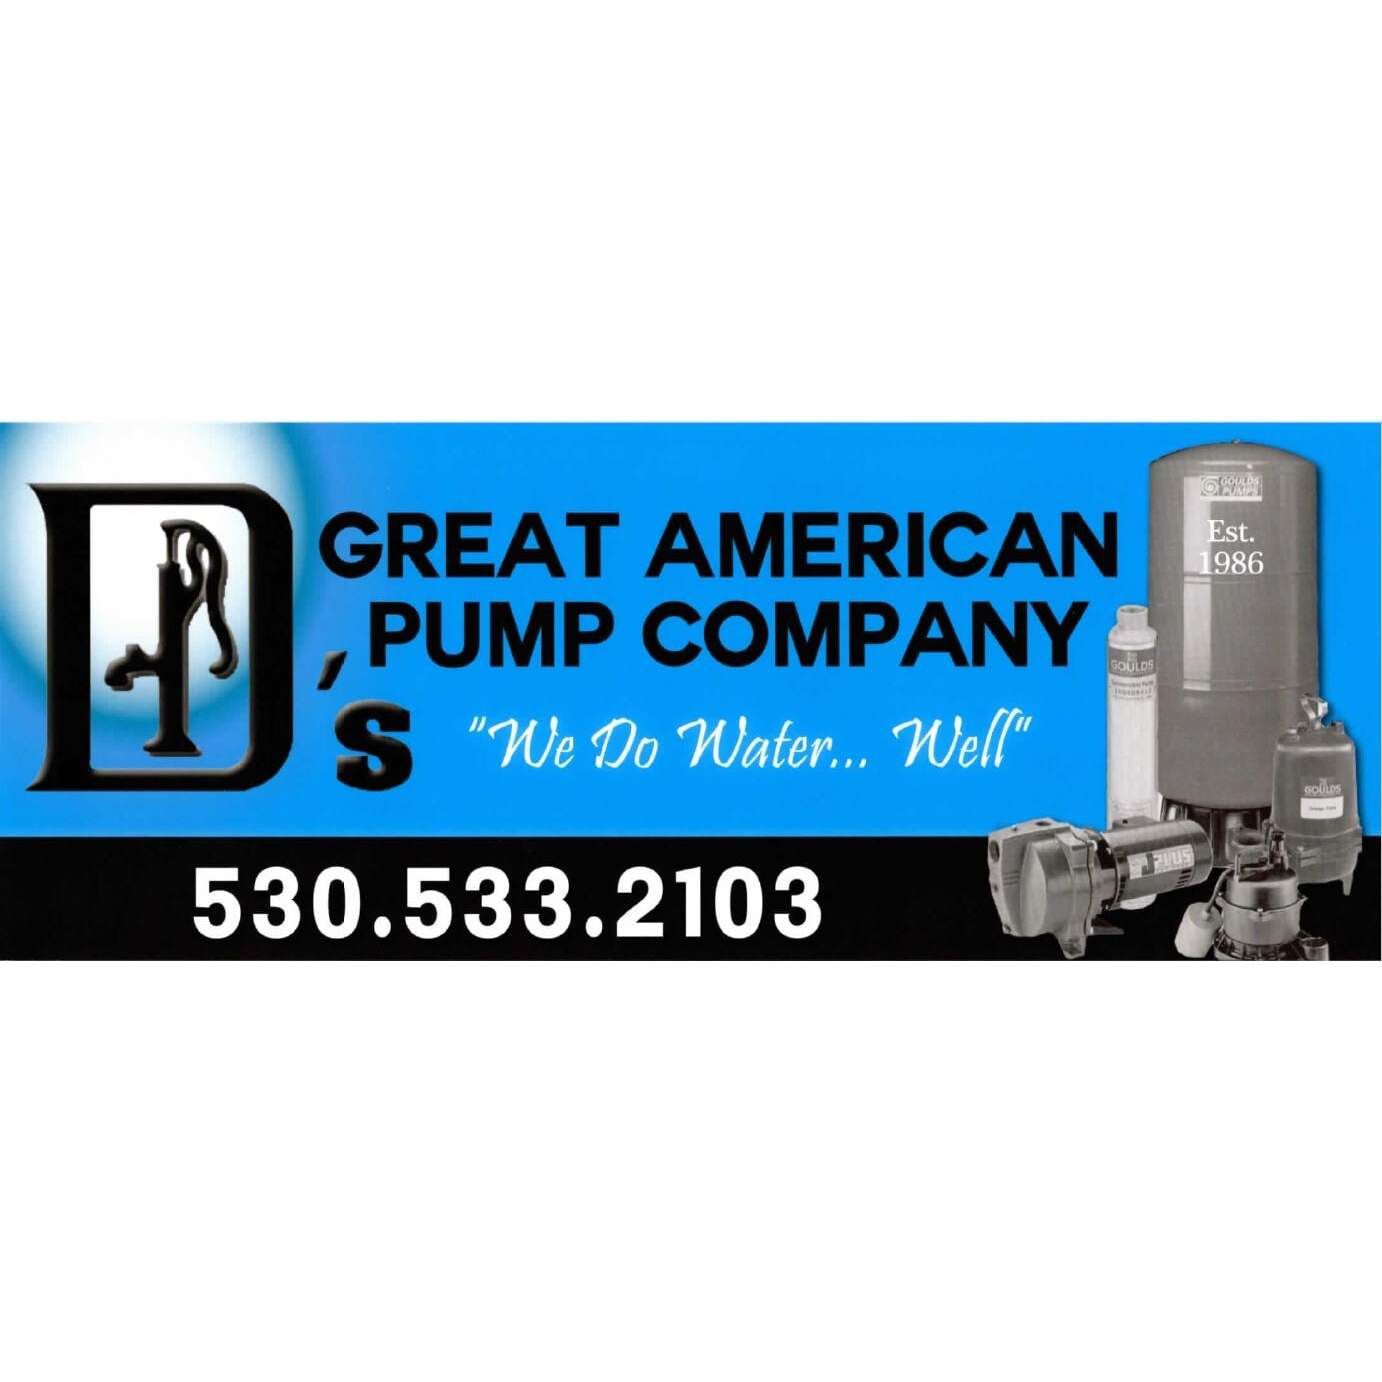 D's Great American Pump Co.